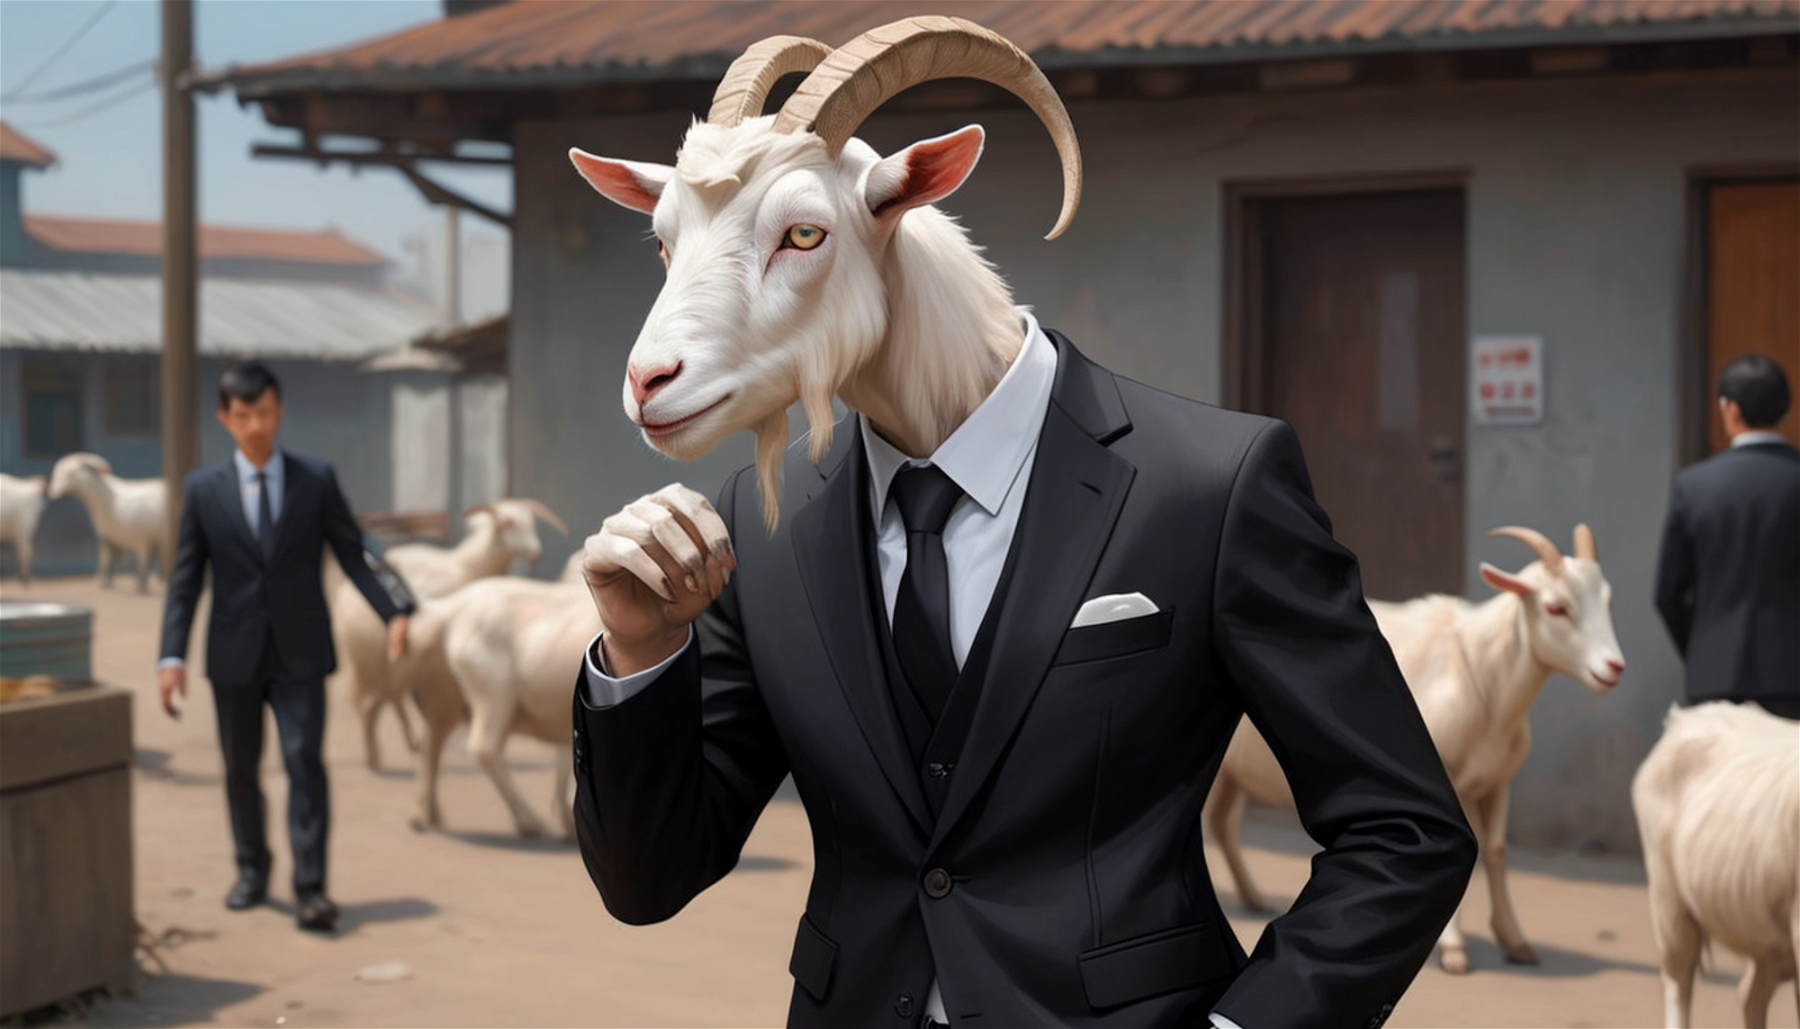 humanoid goat wearing a black suit, depicting everyday life